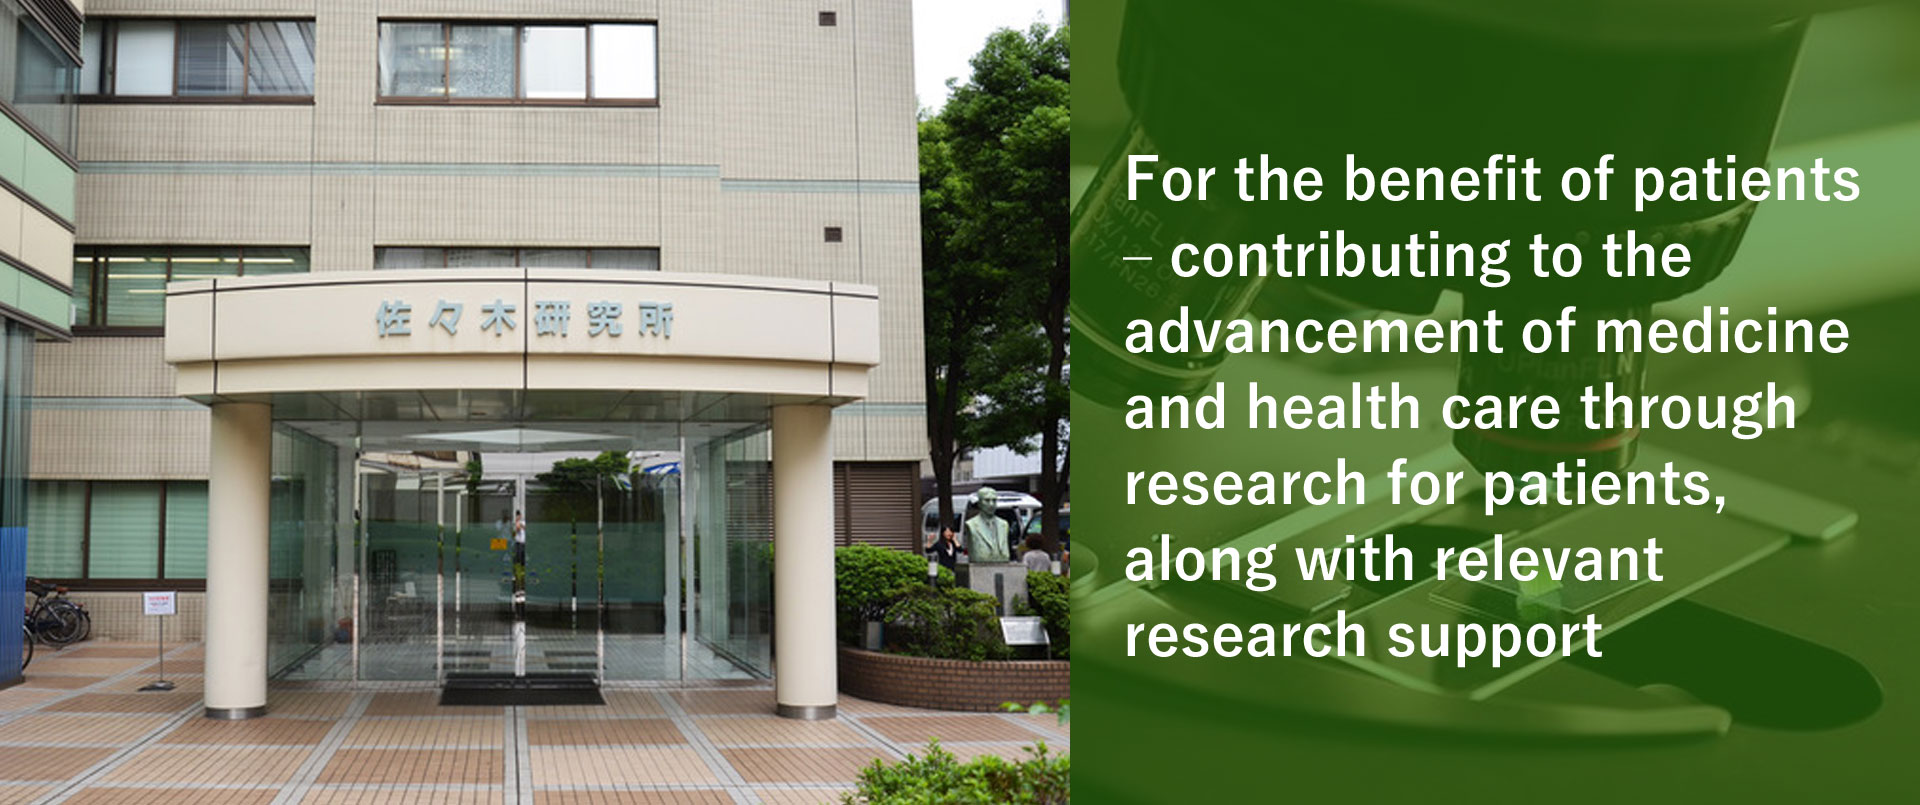 In the interest of patients – contributing to the advancement of medicine and health care through research for patients, along with relevant research support